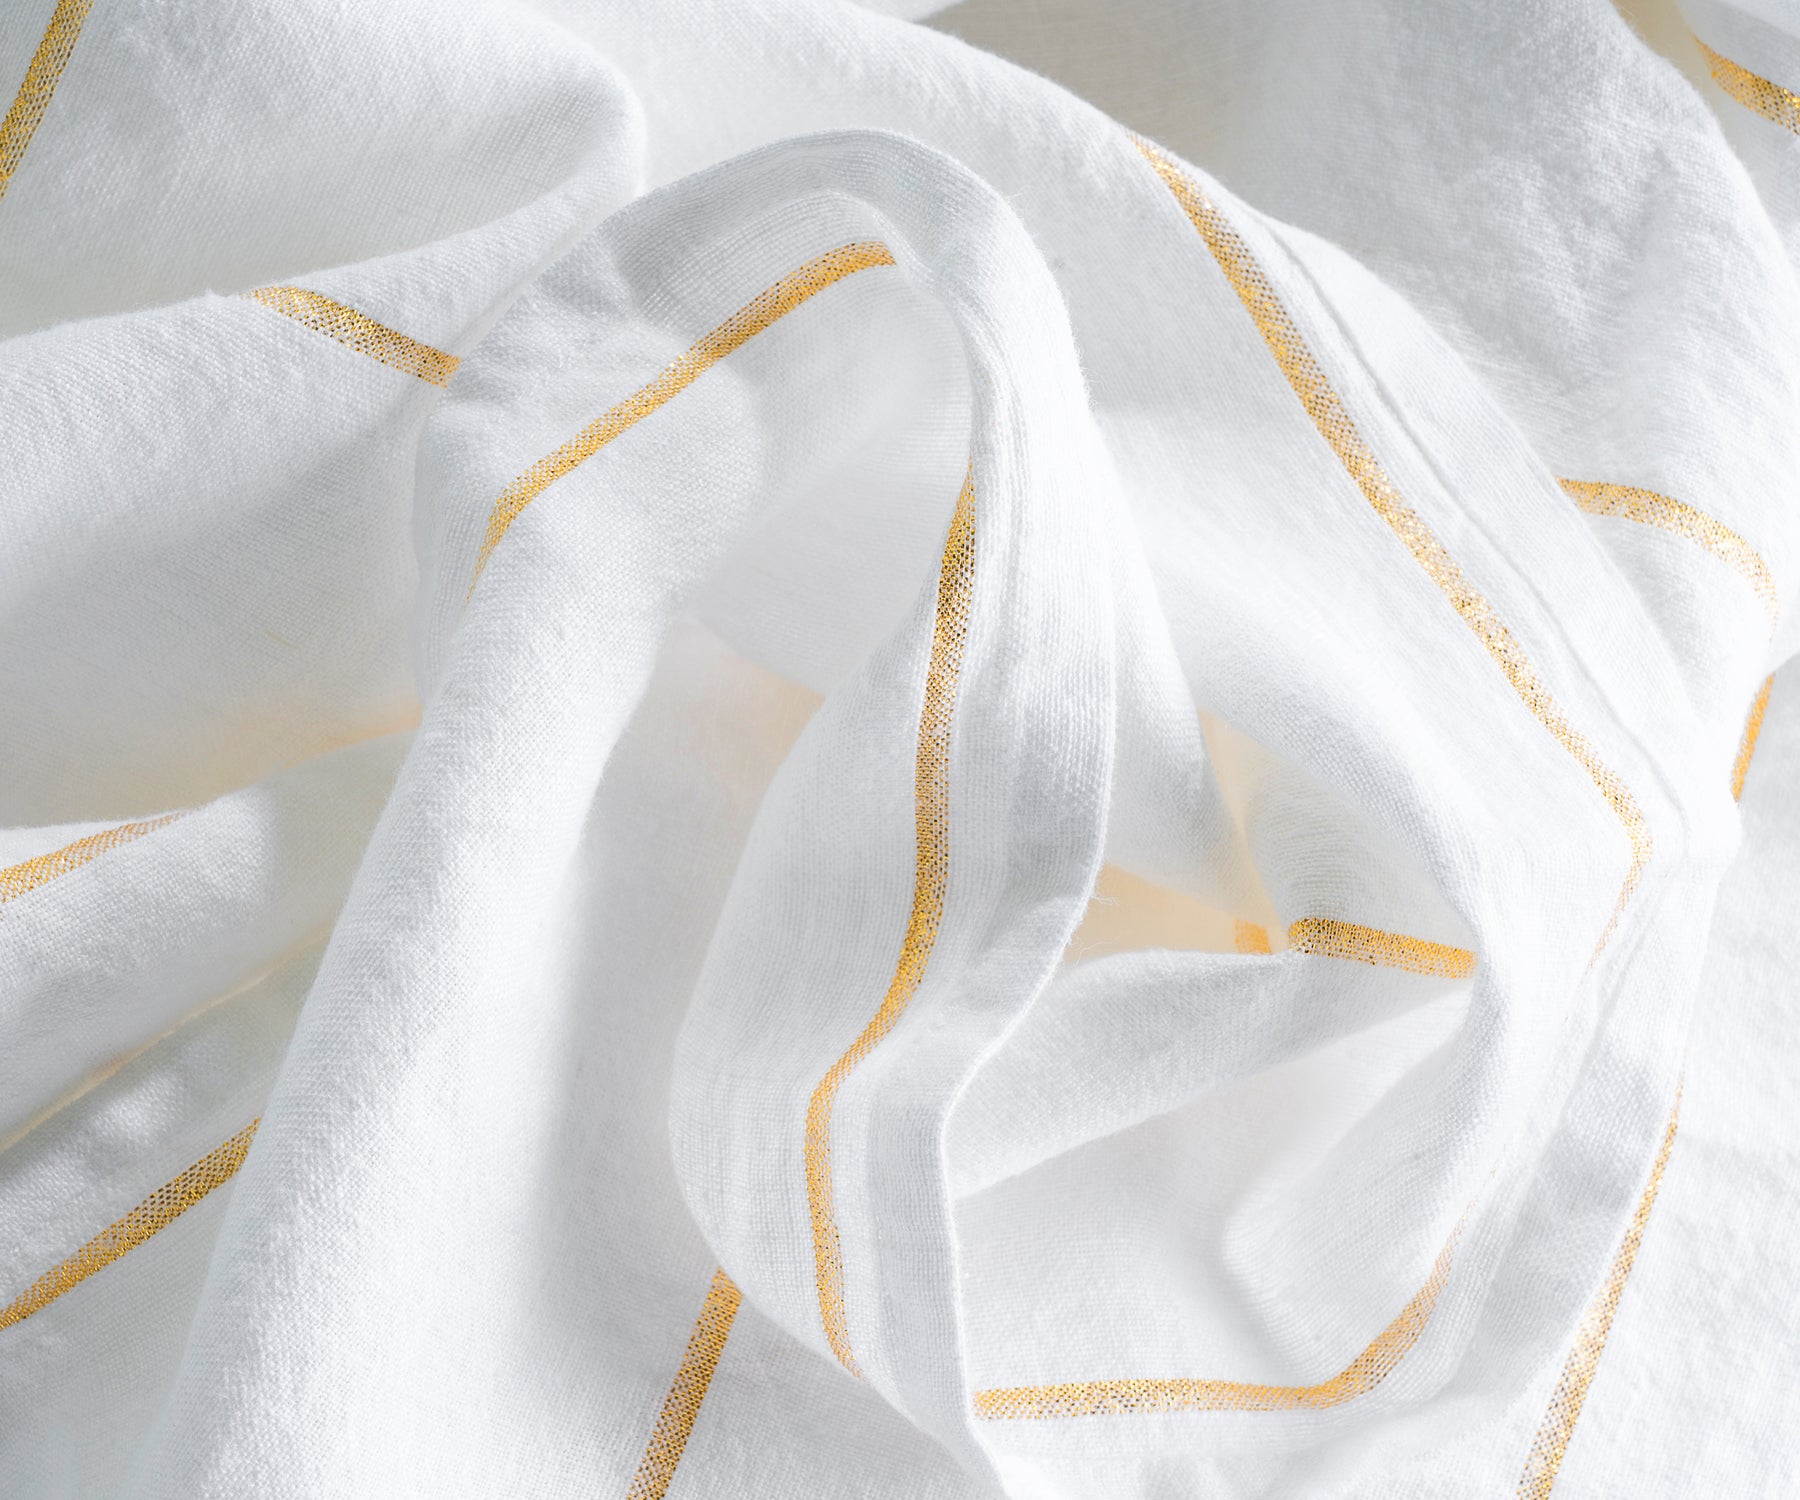 Cotton tablecloths are known for their durability and easy maintenance, making them ideal for regular use. The cotton material provides a soft and comfortable feel, adding a relaxed and cozy ambiance to your party or everyday dining.